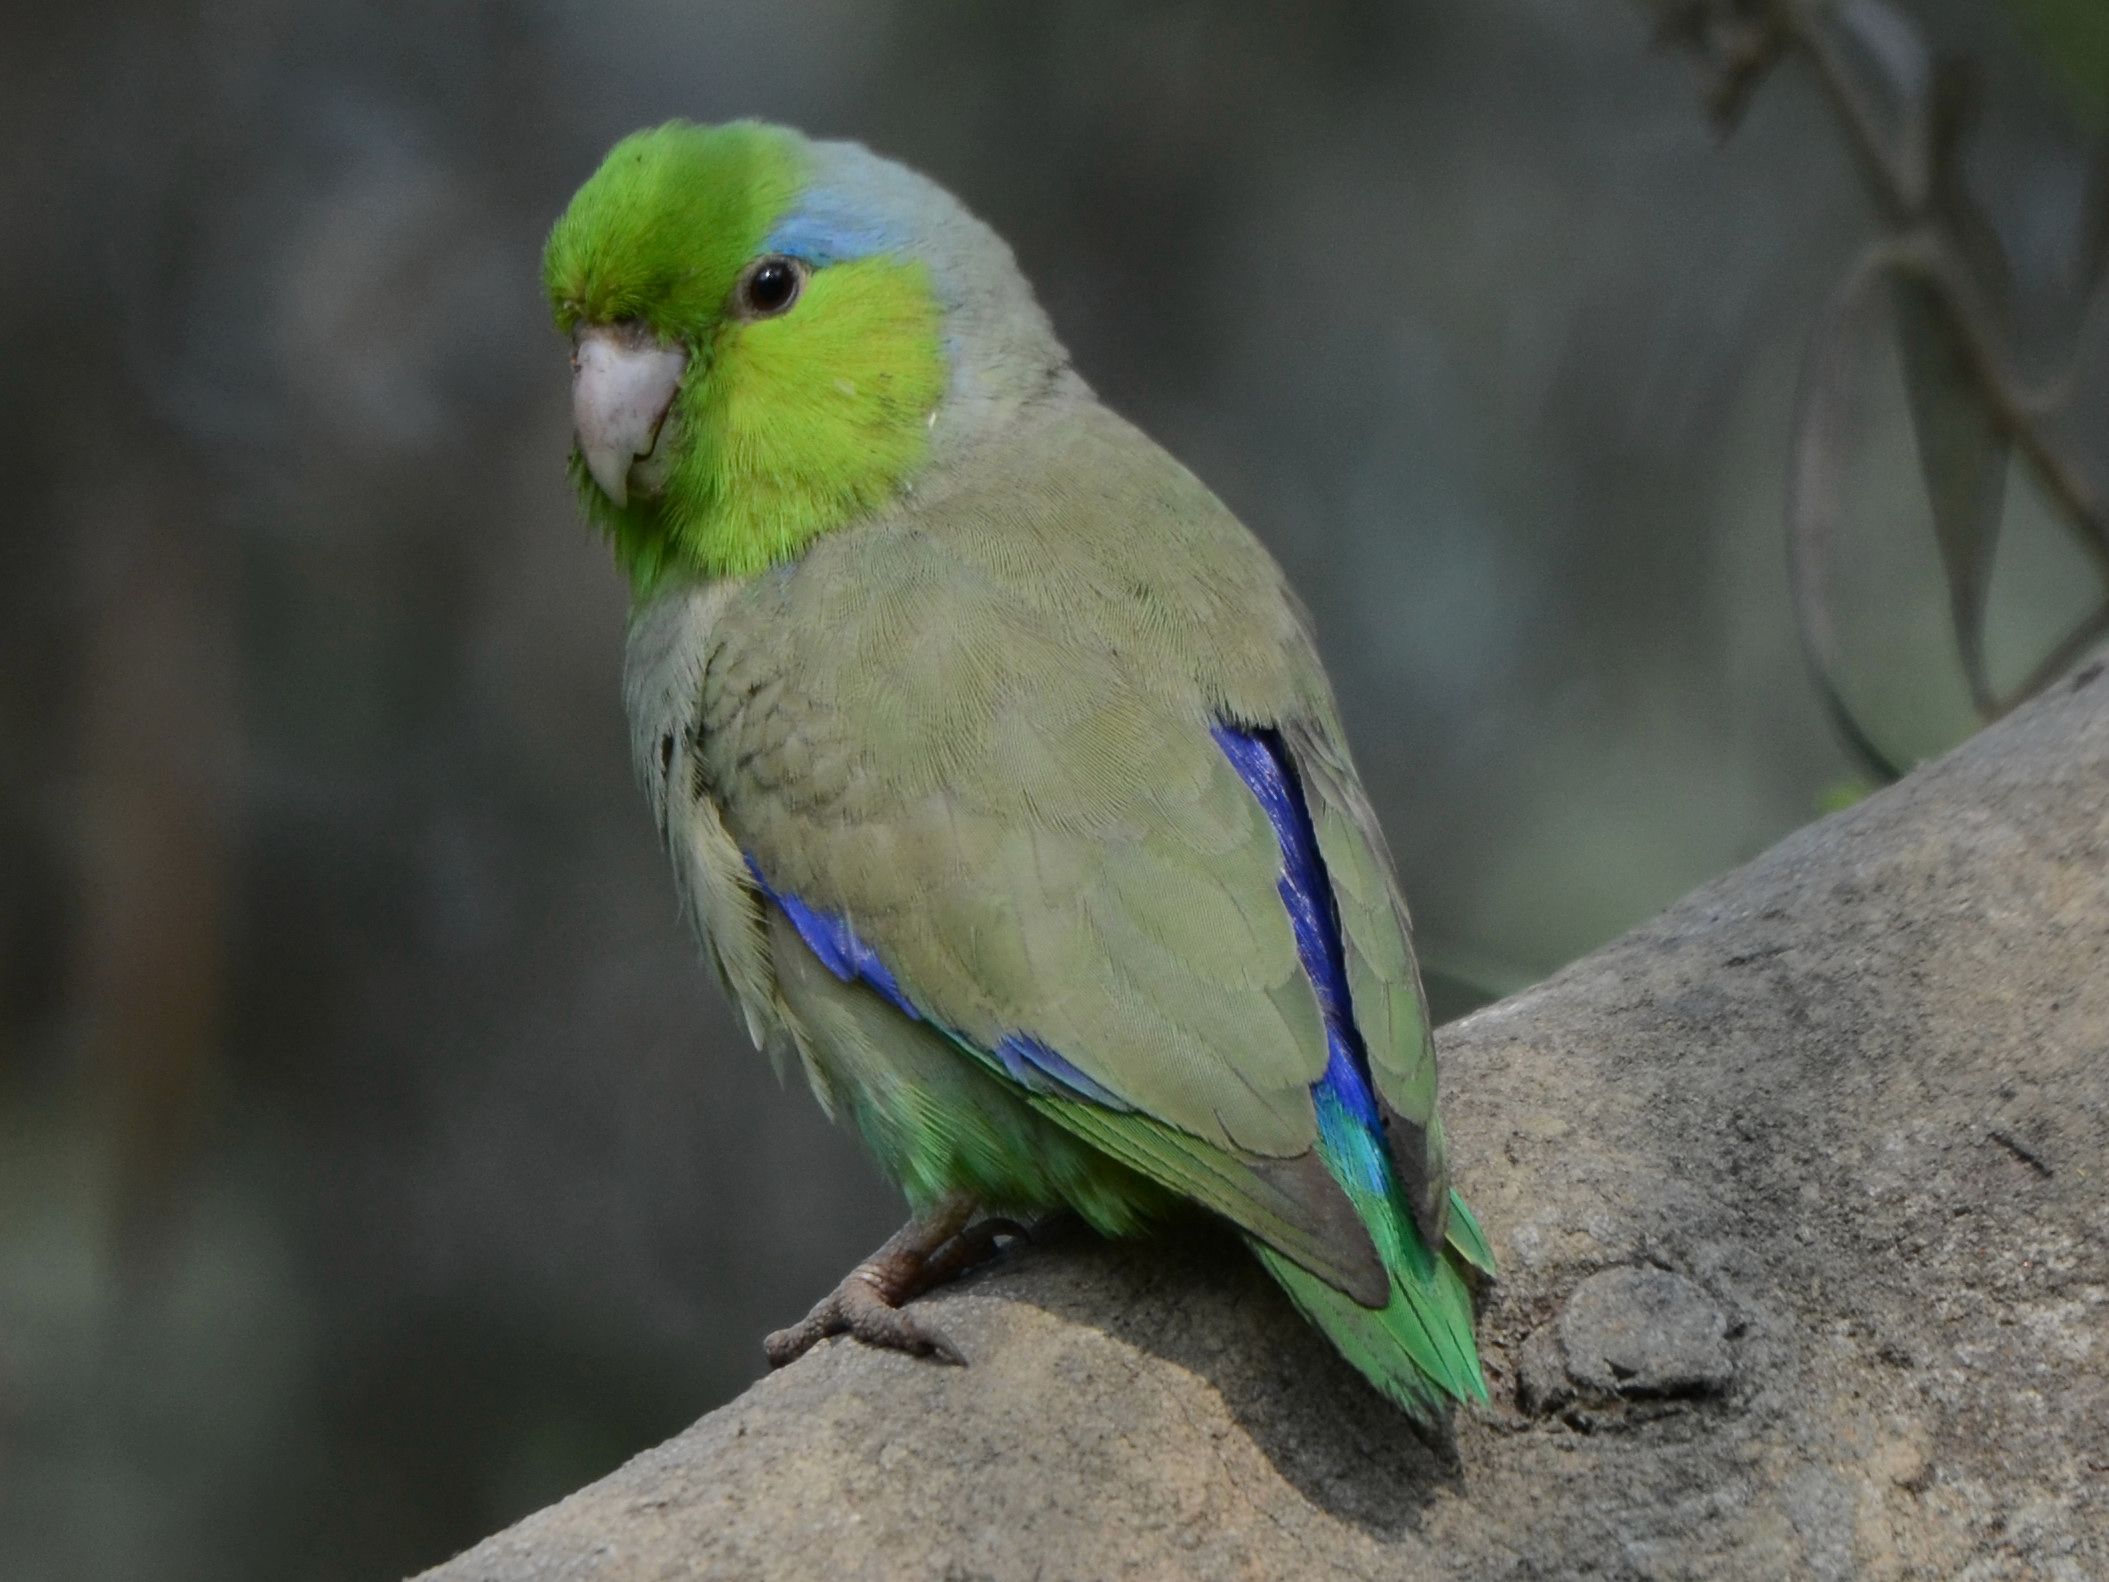 Click picture to see more Pacific Parrotlets.